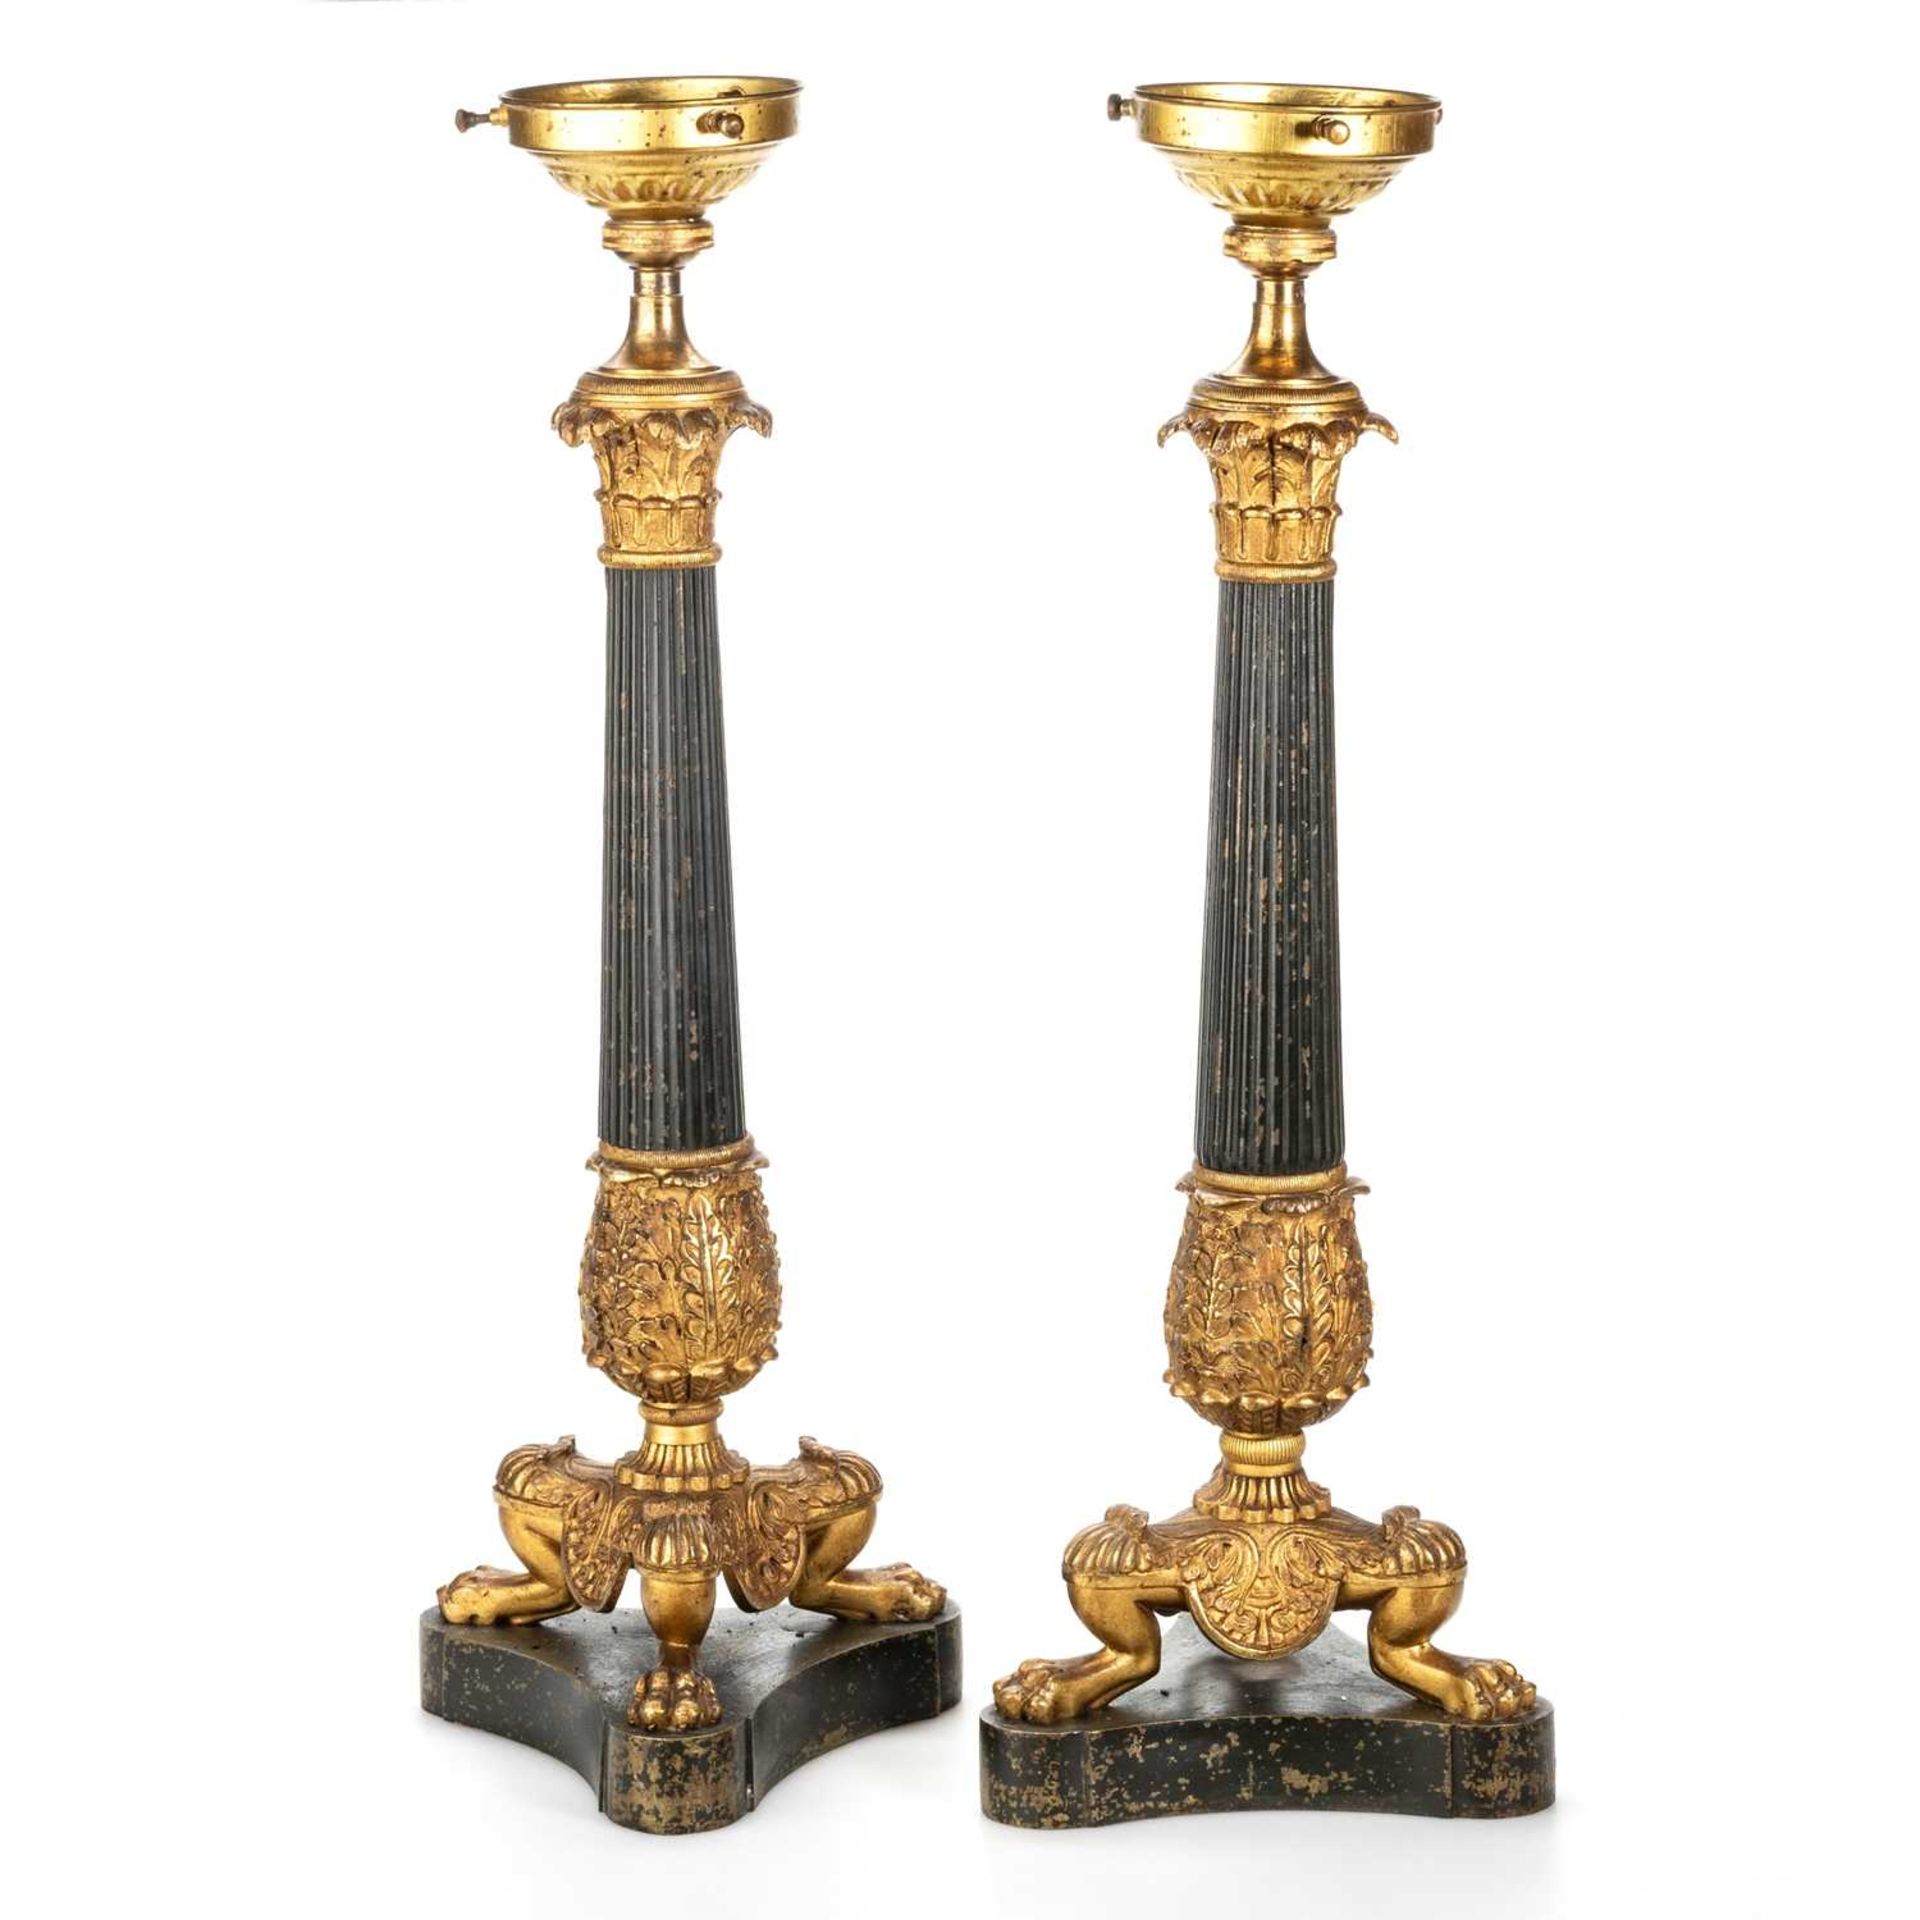 A PAIR OF FRENCH BRONZE TABLE LAMPS, EARLY 19TH CENTURY